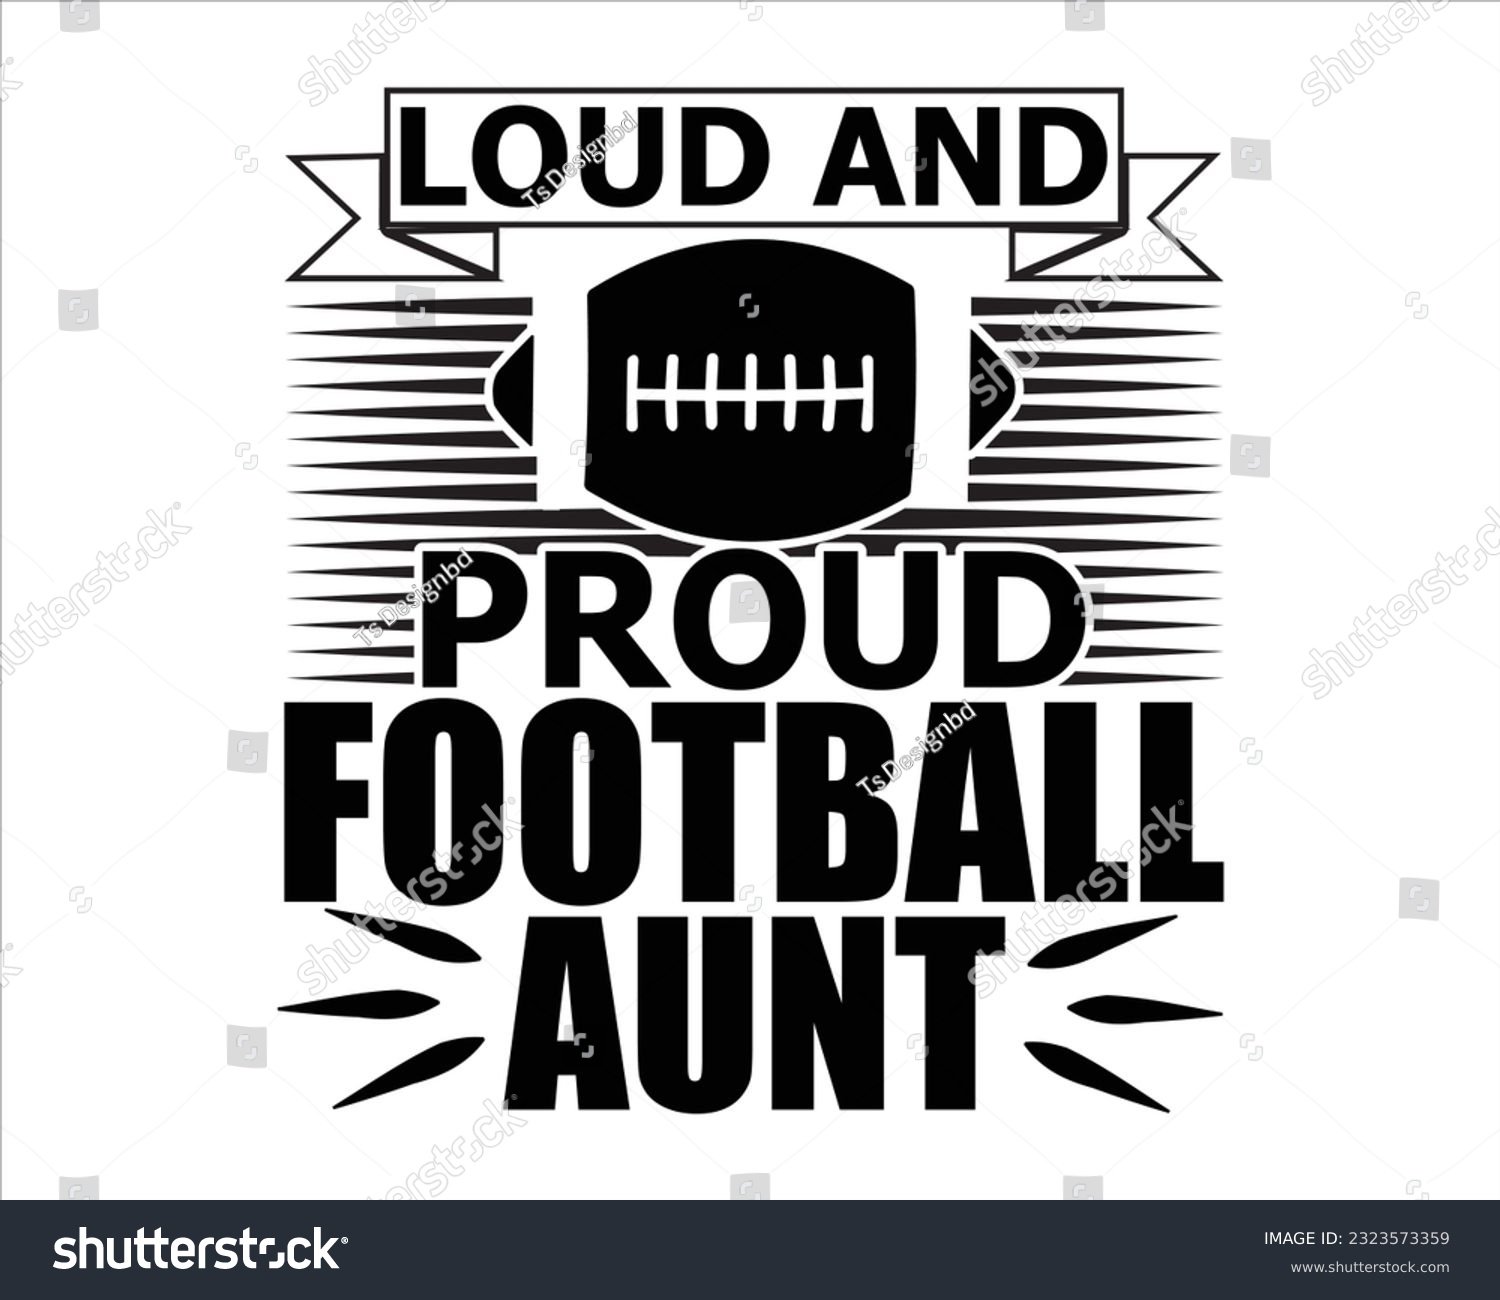 SVG of Loud And Proud Football Aunt Svg Design,Football Mom Dad Sister SVG,,Football Game Day svg,Football svg Funny Footbal Sayings,Cut Files, svg